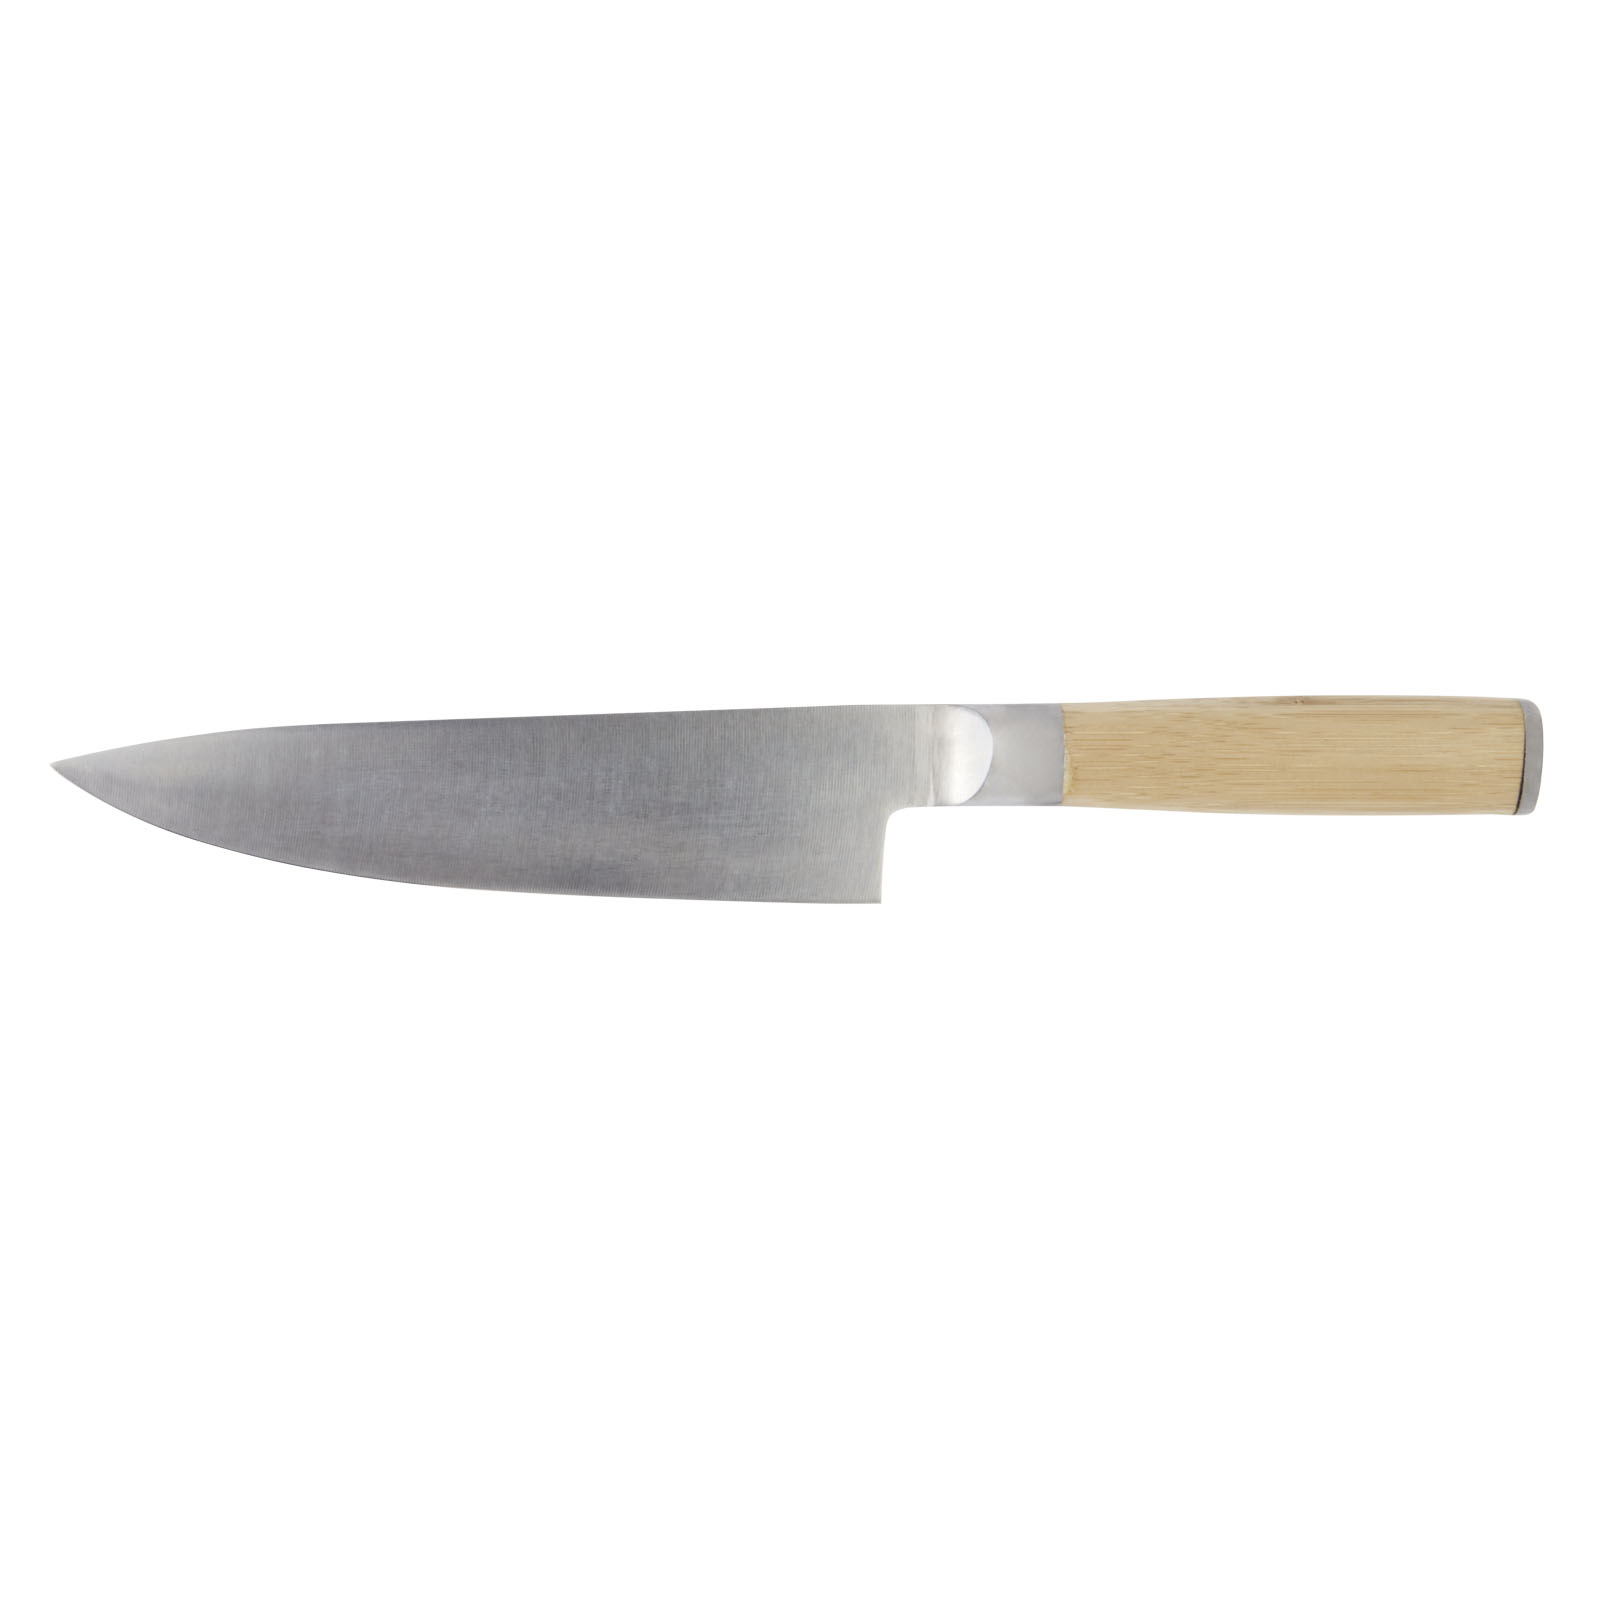 Advertising Chef's Knives - Cocin chef's knife - 1